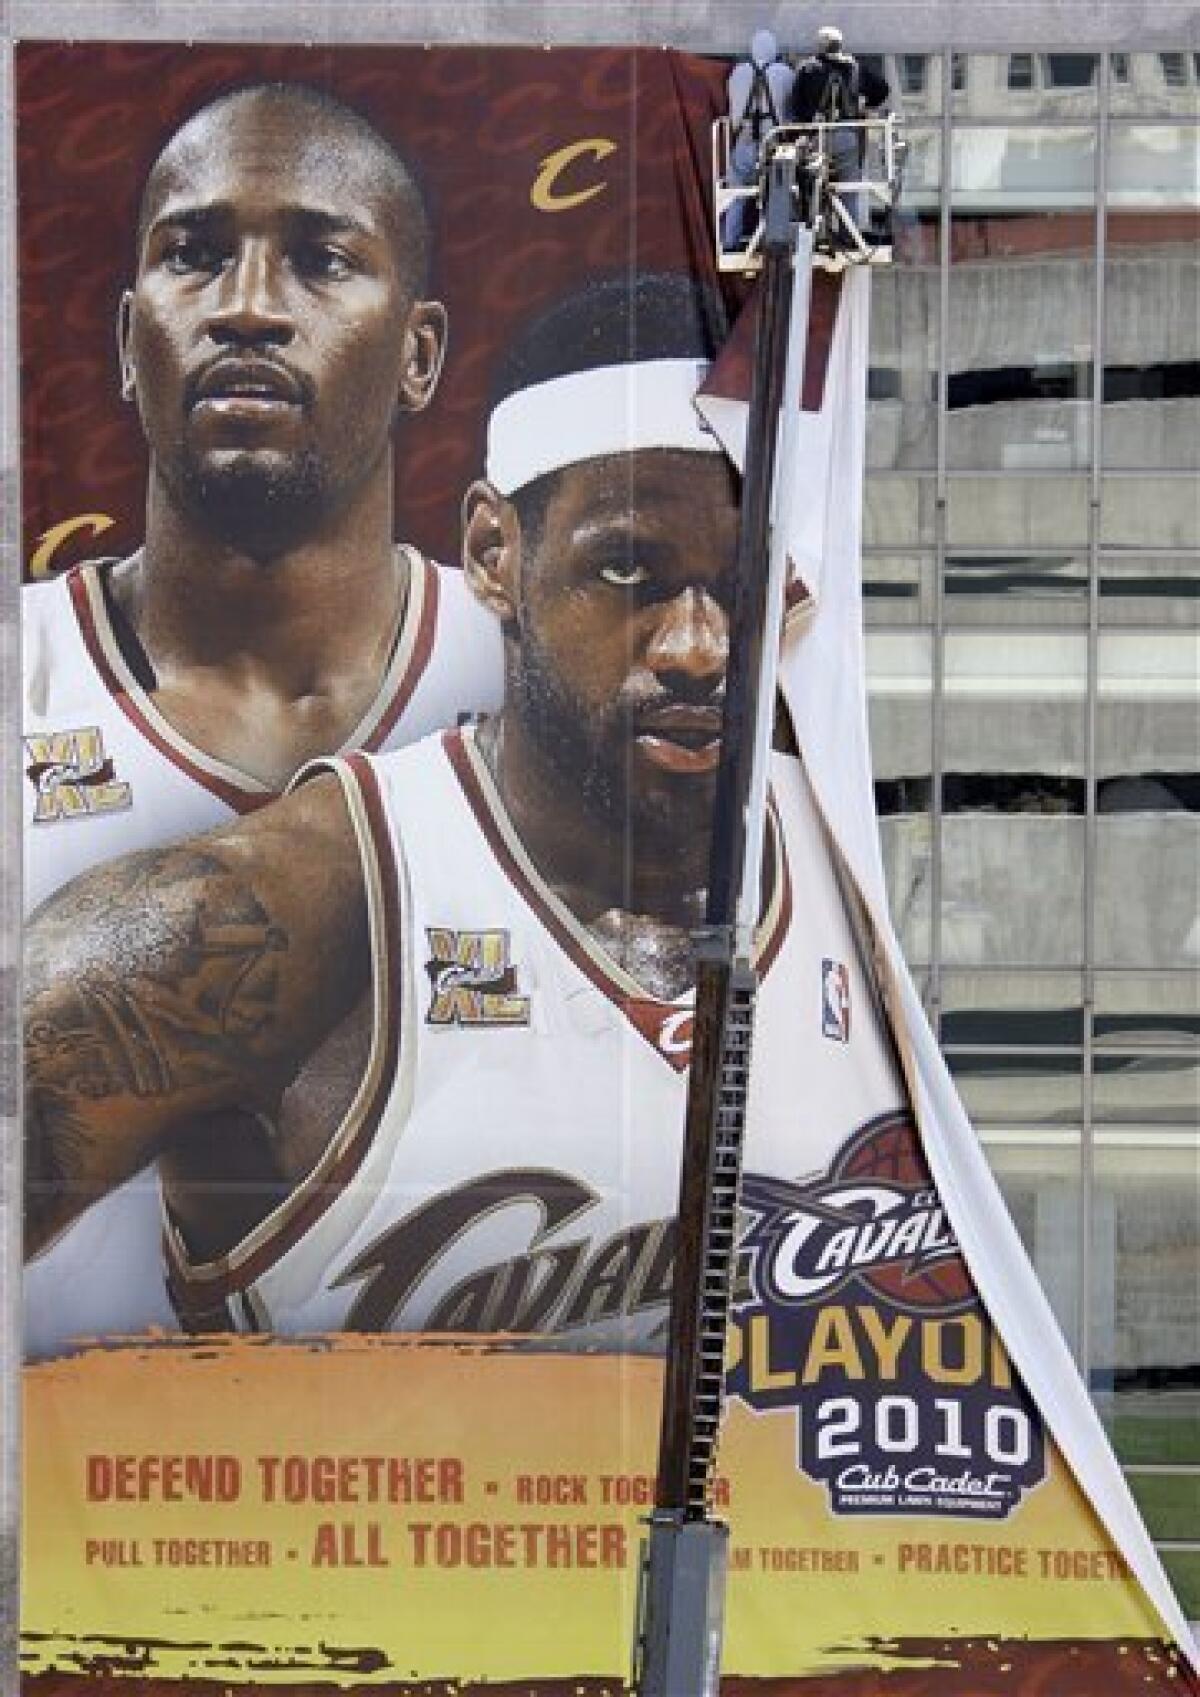 Image of new Cleveland Cavaliers 'The Land' jersey leaks online